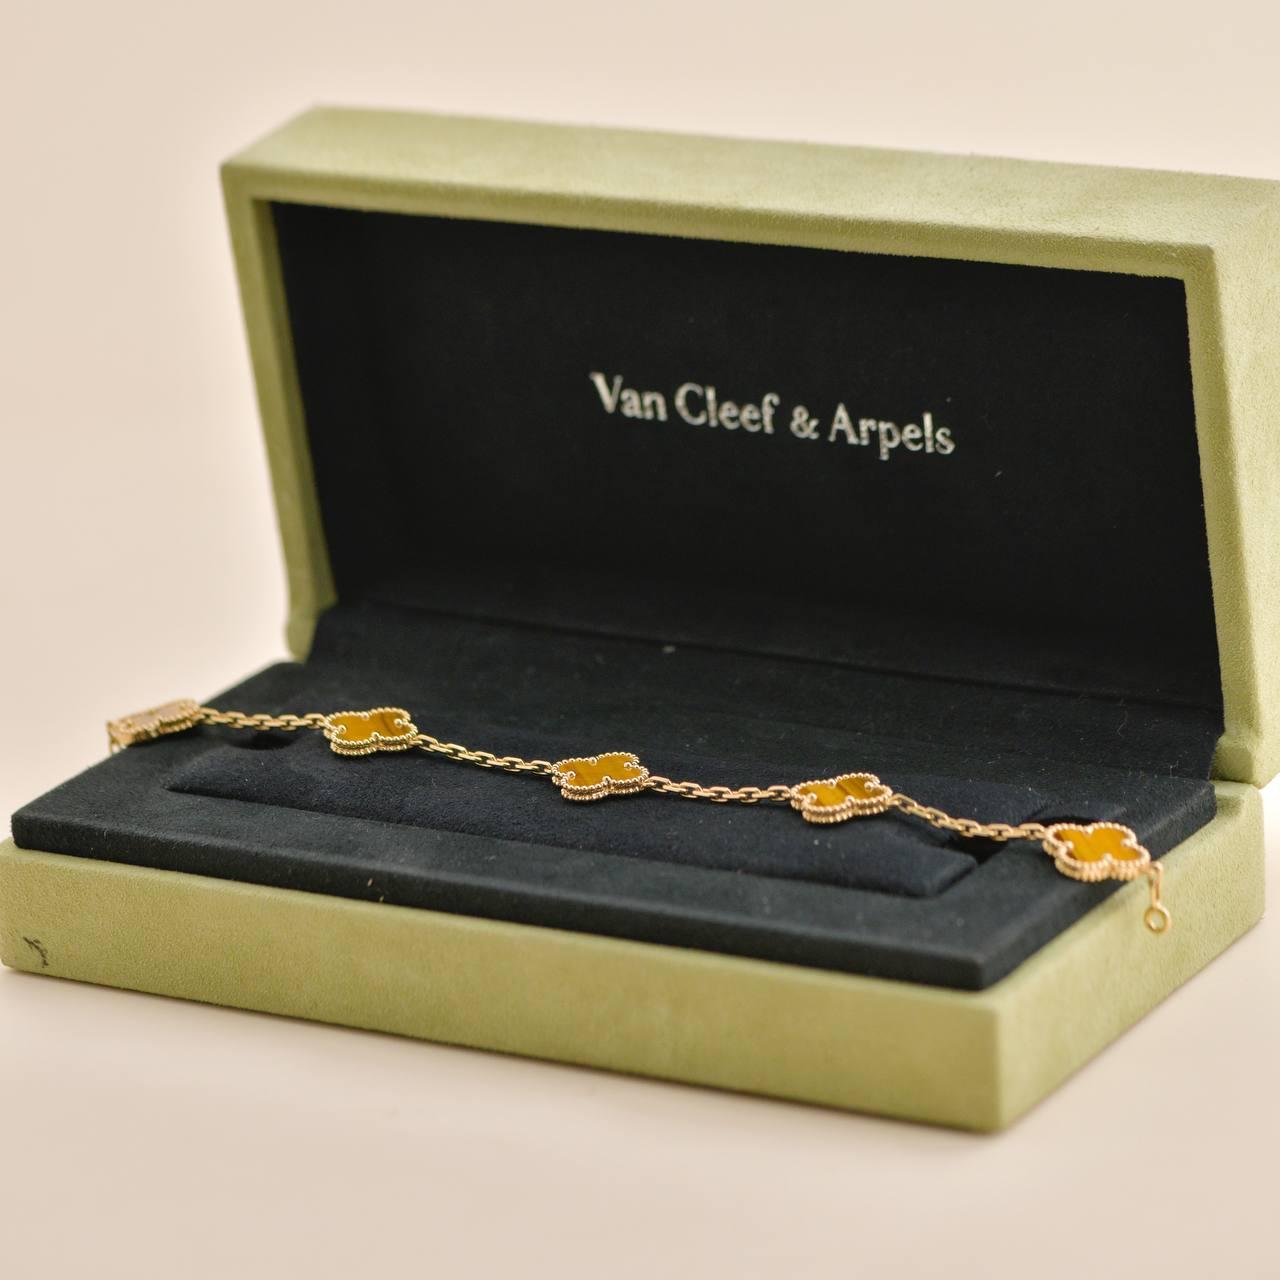 SKU 	AT-2040
Brand	Van Cleef & Arpels
Model	VCARD35600
Date	Circa 2020
________________________________________________________________
Metal	18K Yellow Gold
Serial No.	JB******
Chain Weight	Approx. 11.4g
Chain Length	Approx.